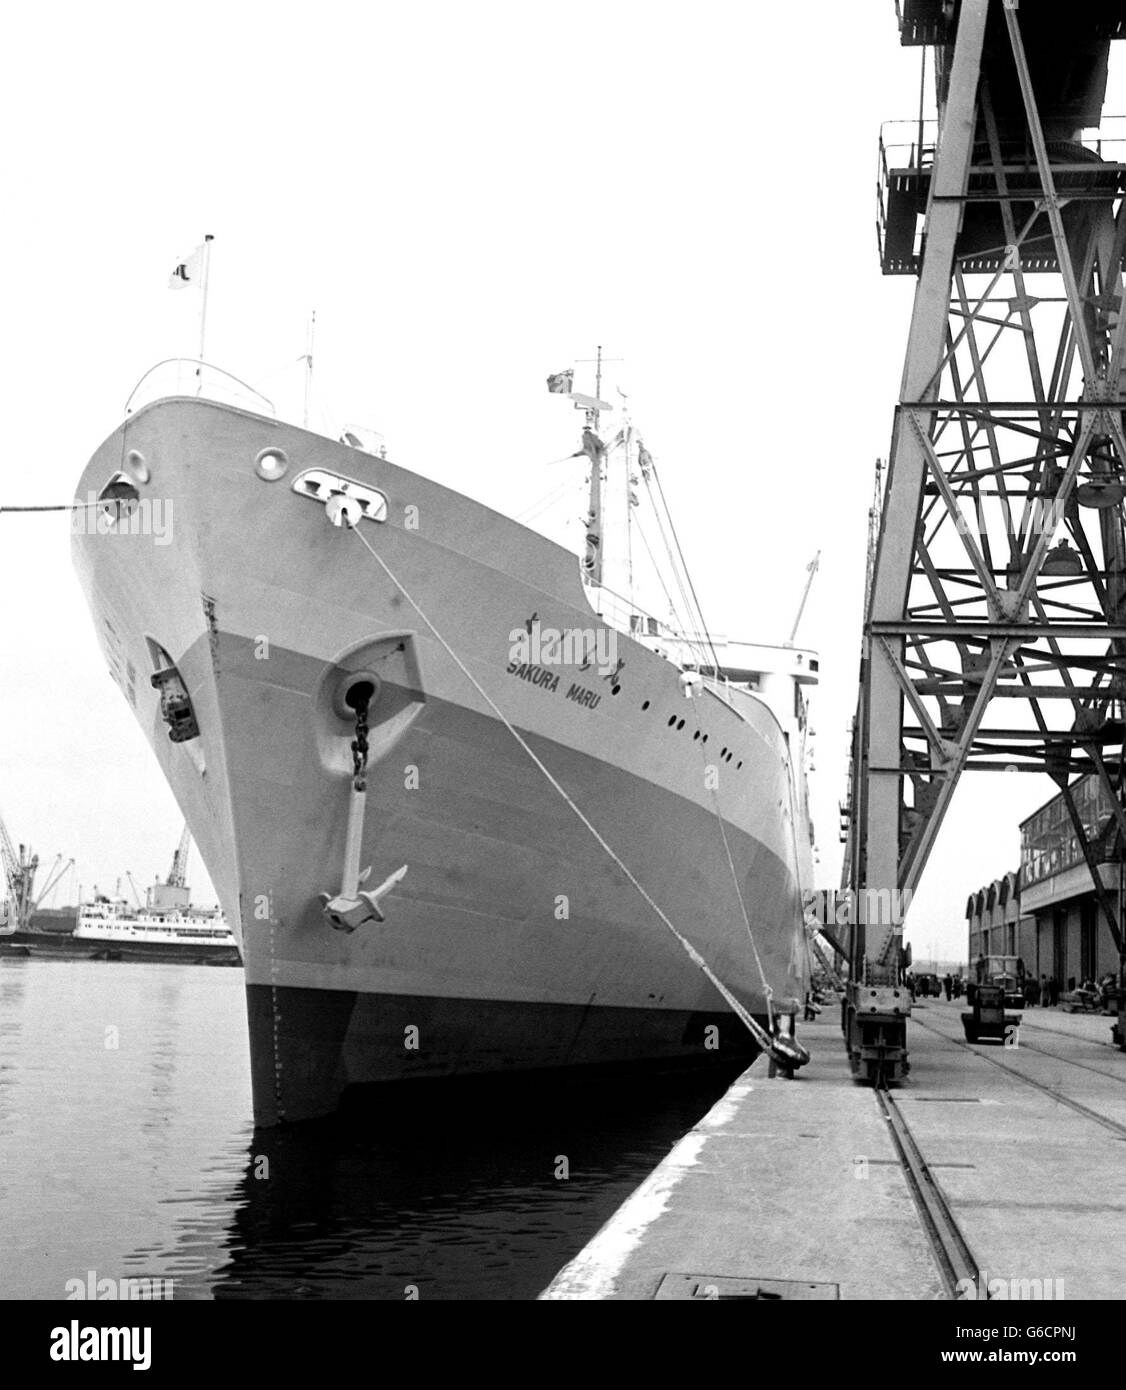 The Sakura Maru, 12, 688-tons, first ship in the world designed specifically to be a floating fair, pictured moored at No.1 Shed, Tilbury Dock, Essex. Stock Photo